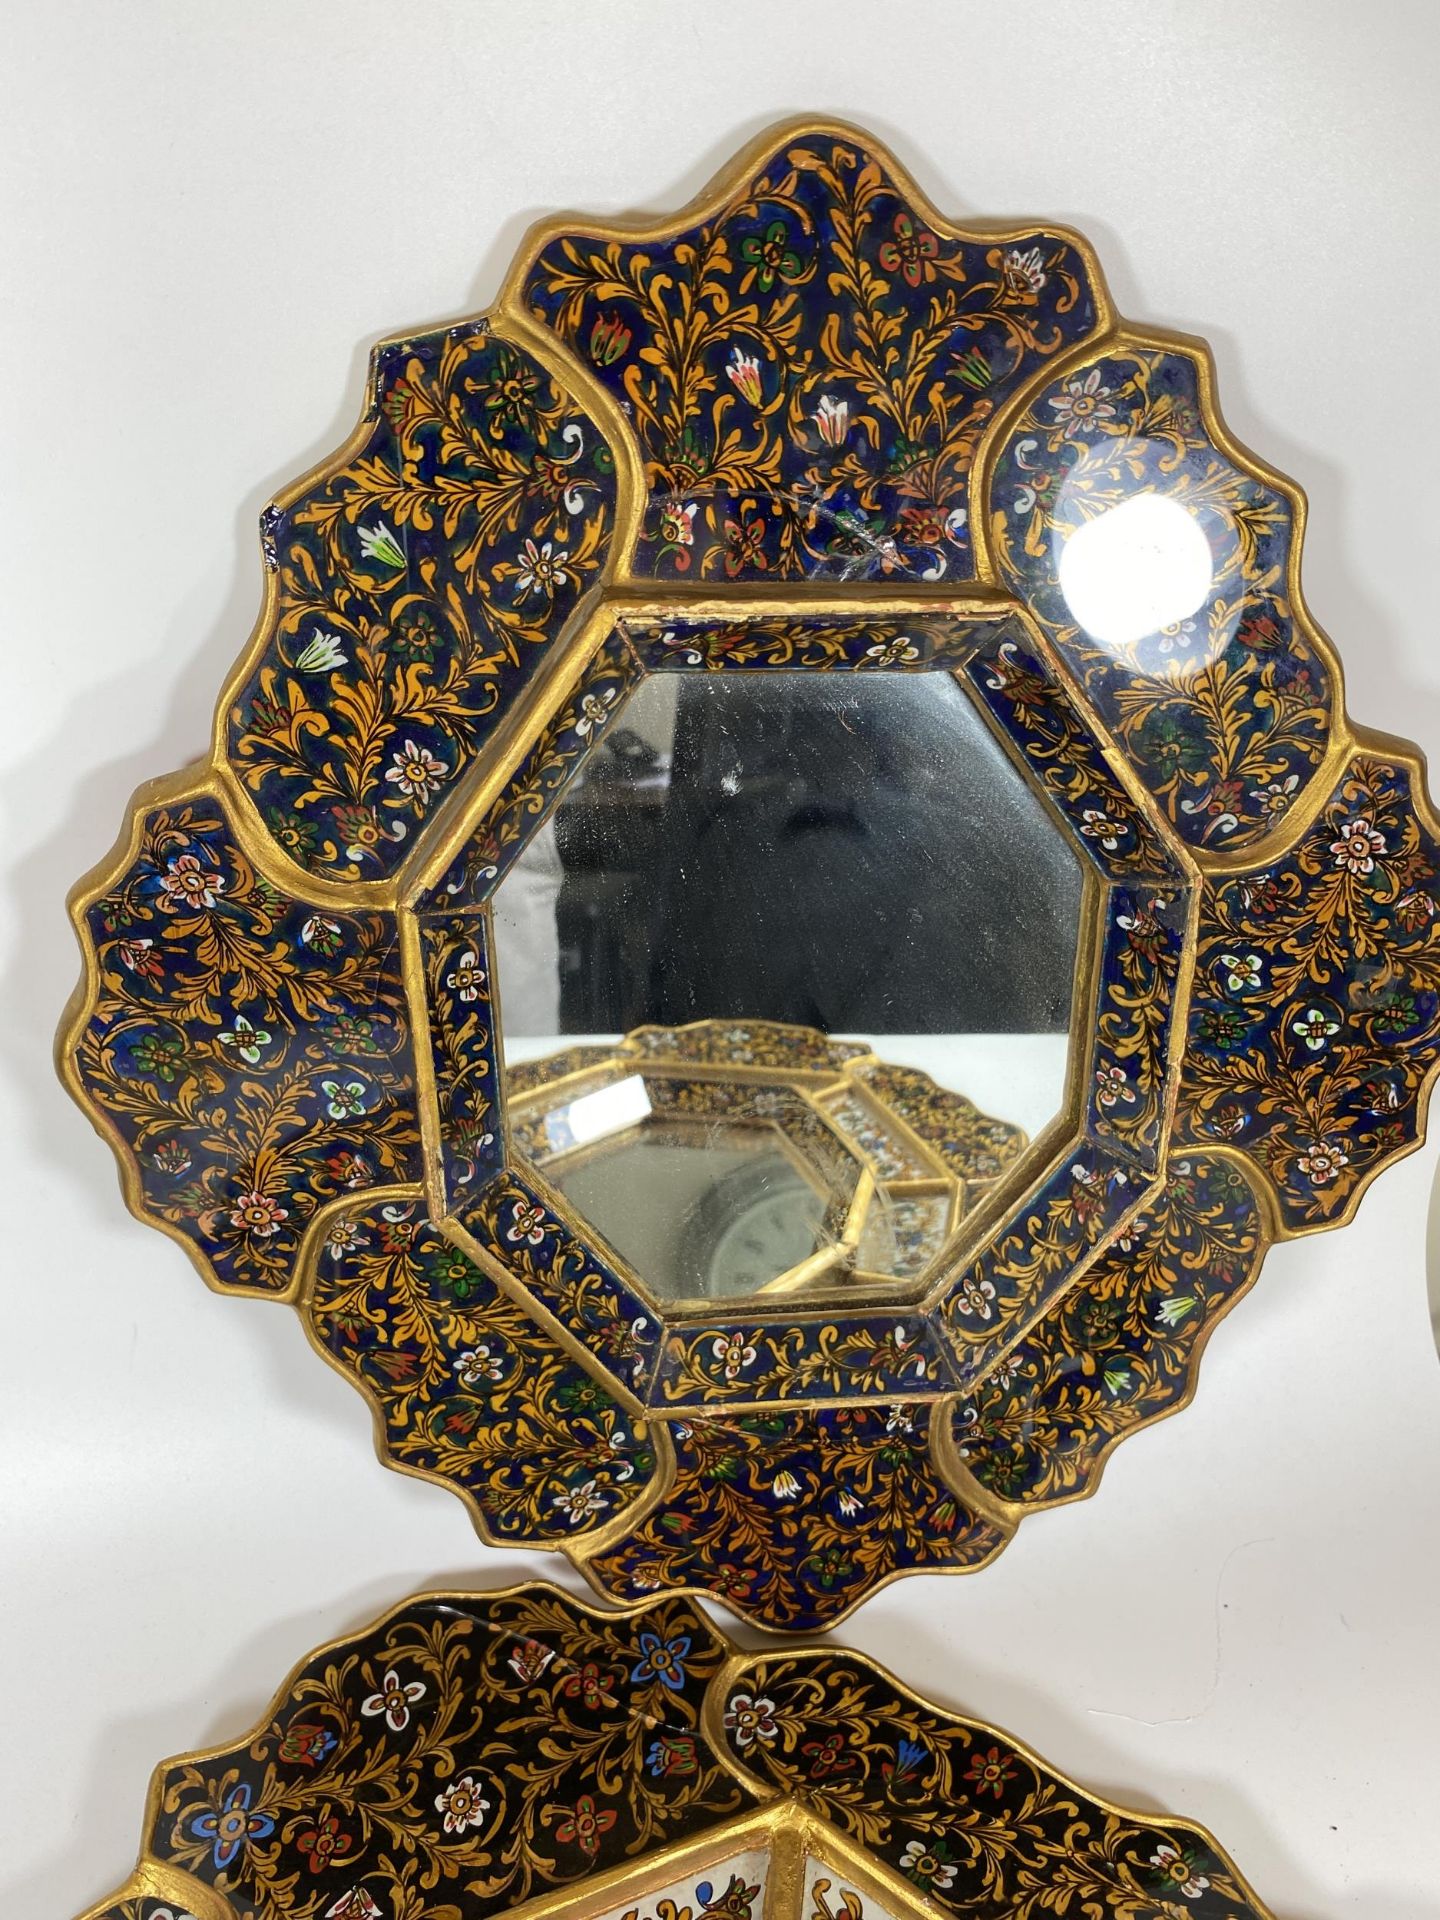 TWO MIDDLE EASTERN STYLE DECORATIVE PANELLED MIRRORS, LARGEST 59 X 46CM - Image 2 of 5